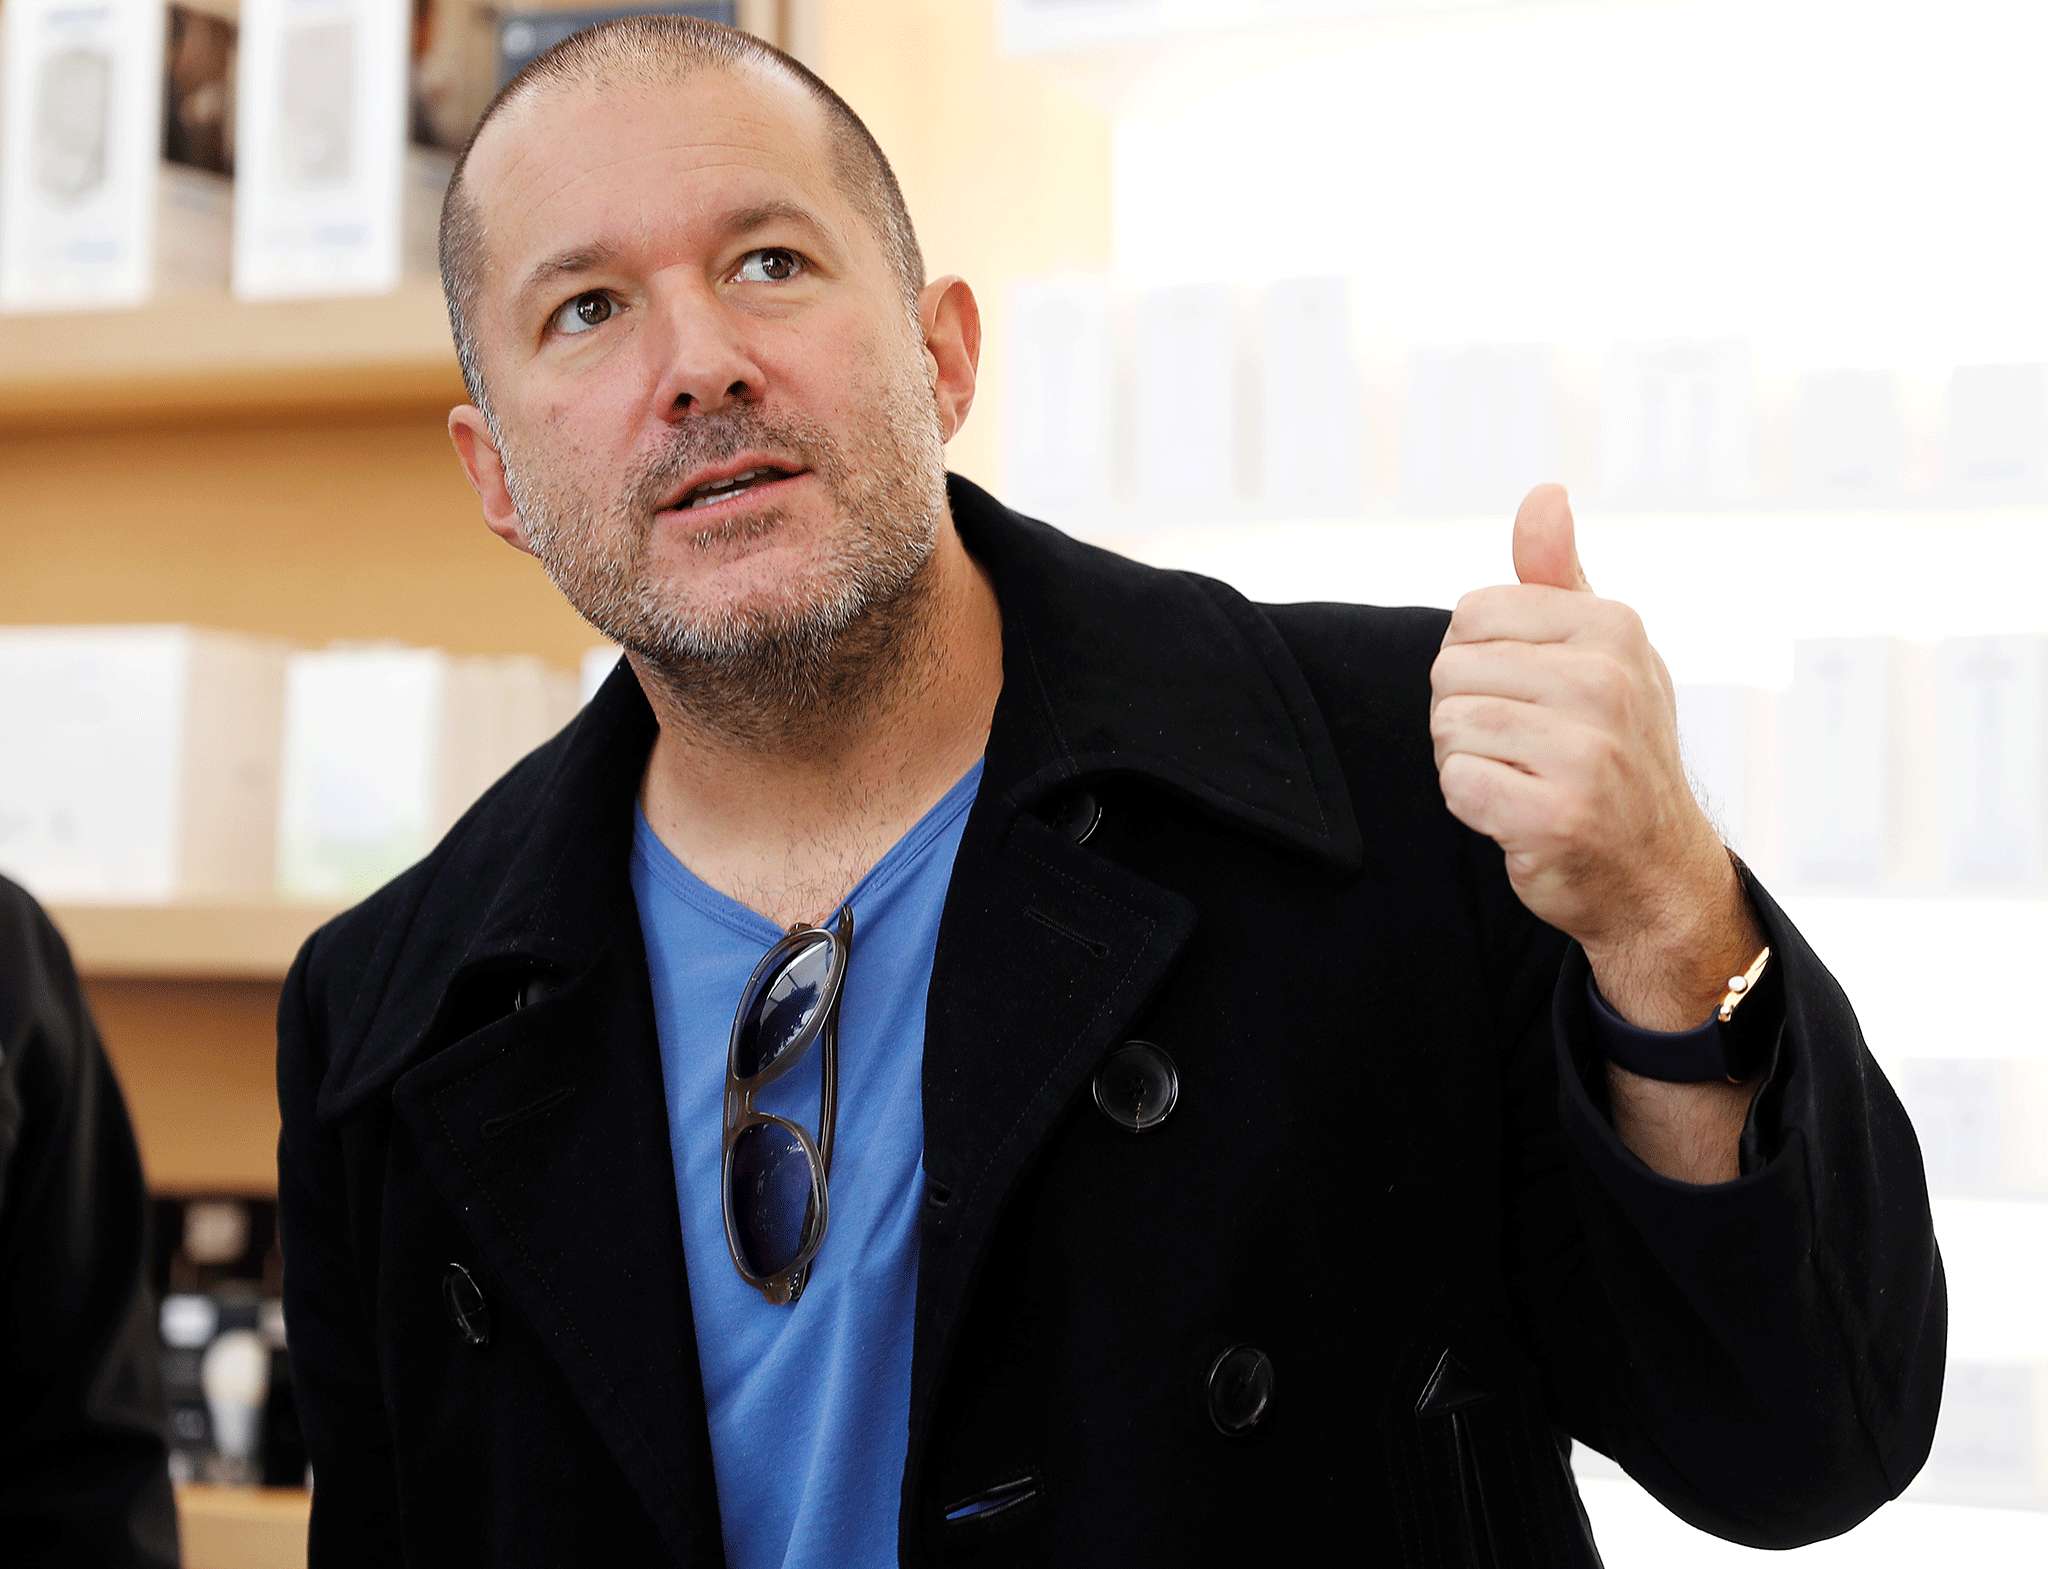 Sir Jonathan has been responsible for the design of the iPhone, iPod and iMac in more than 20 years at Apple